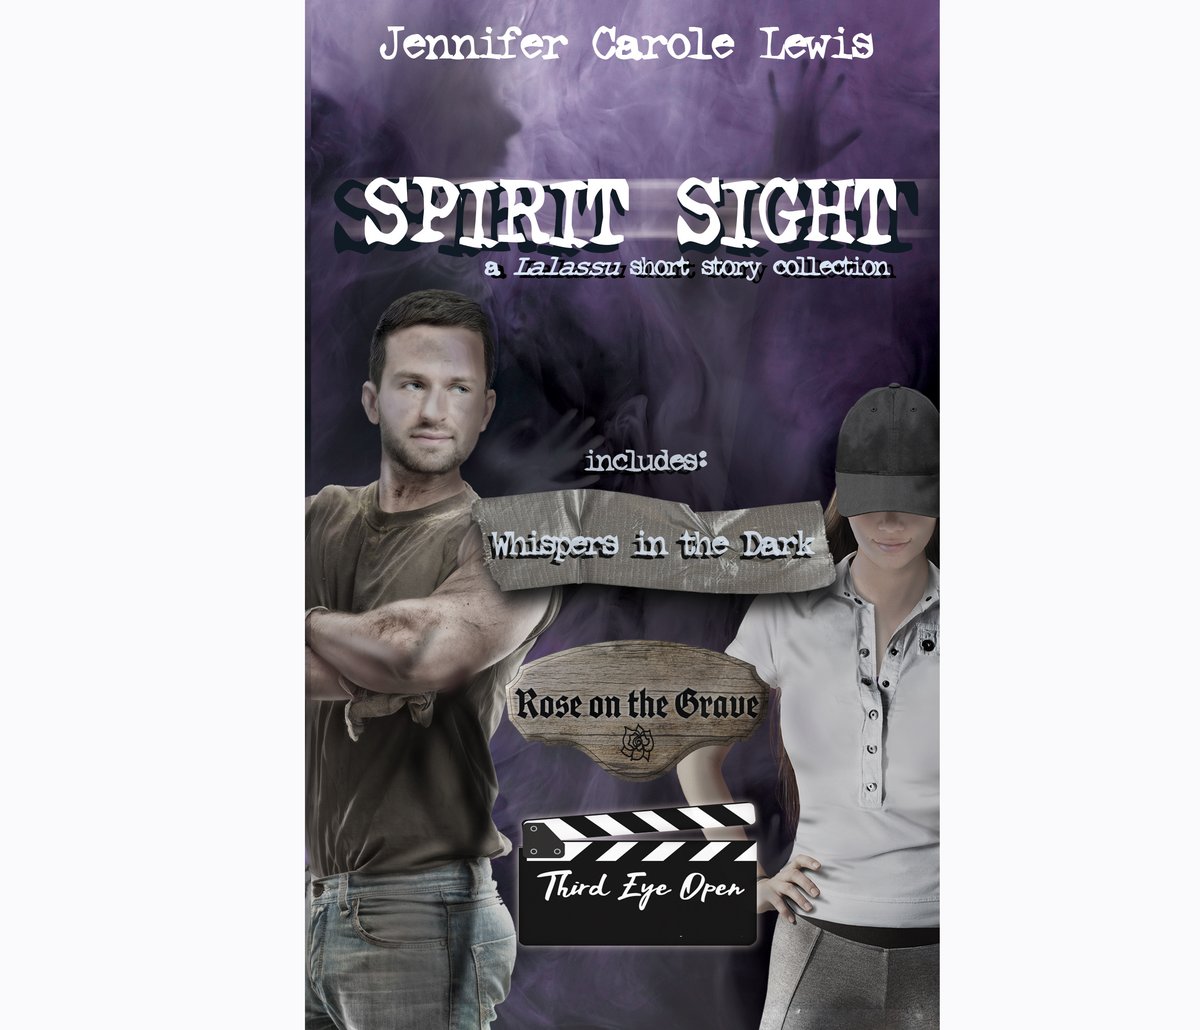 A collection of linked short stories about a pragmatic, skeptical contractor and a determined paranormal investigator. books2read.com/u/bwqoYG #ghosthunter #paranormalromance #oppositesattract